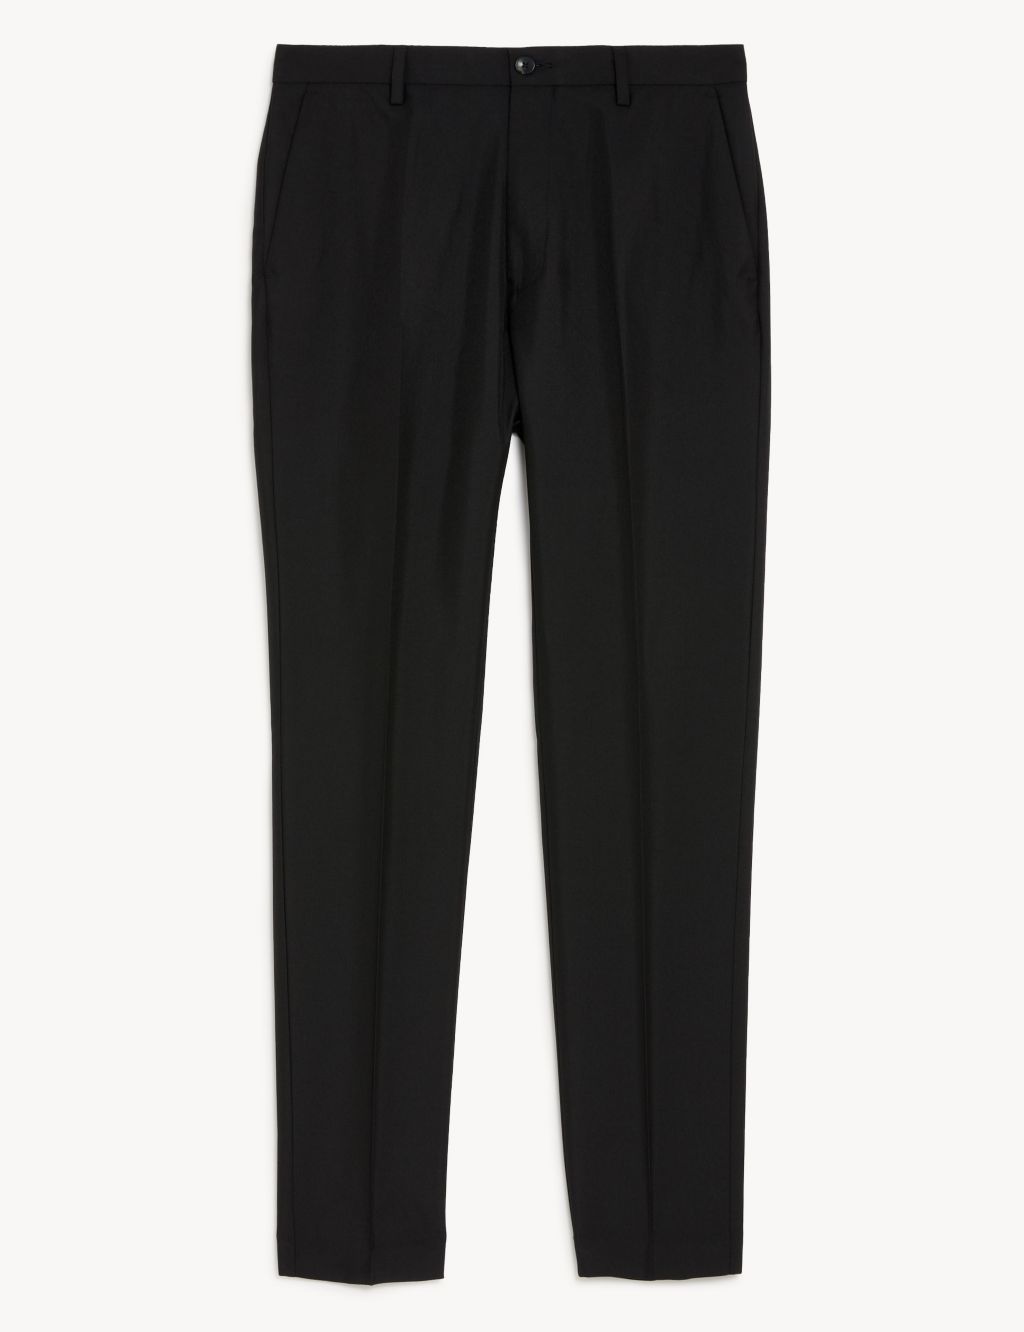 Skinny Fit Trousers image 8